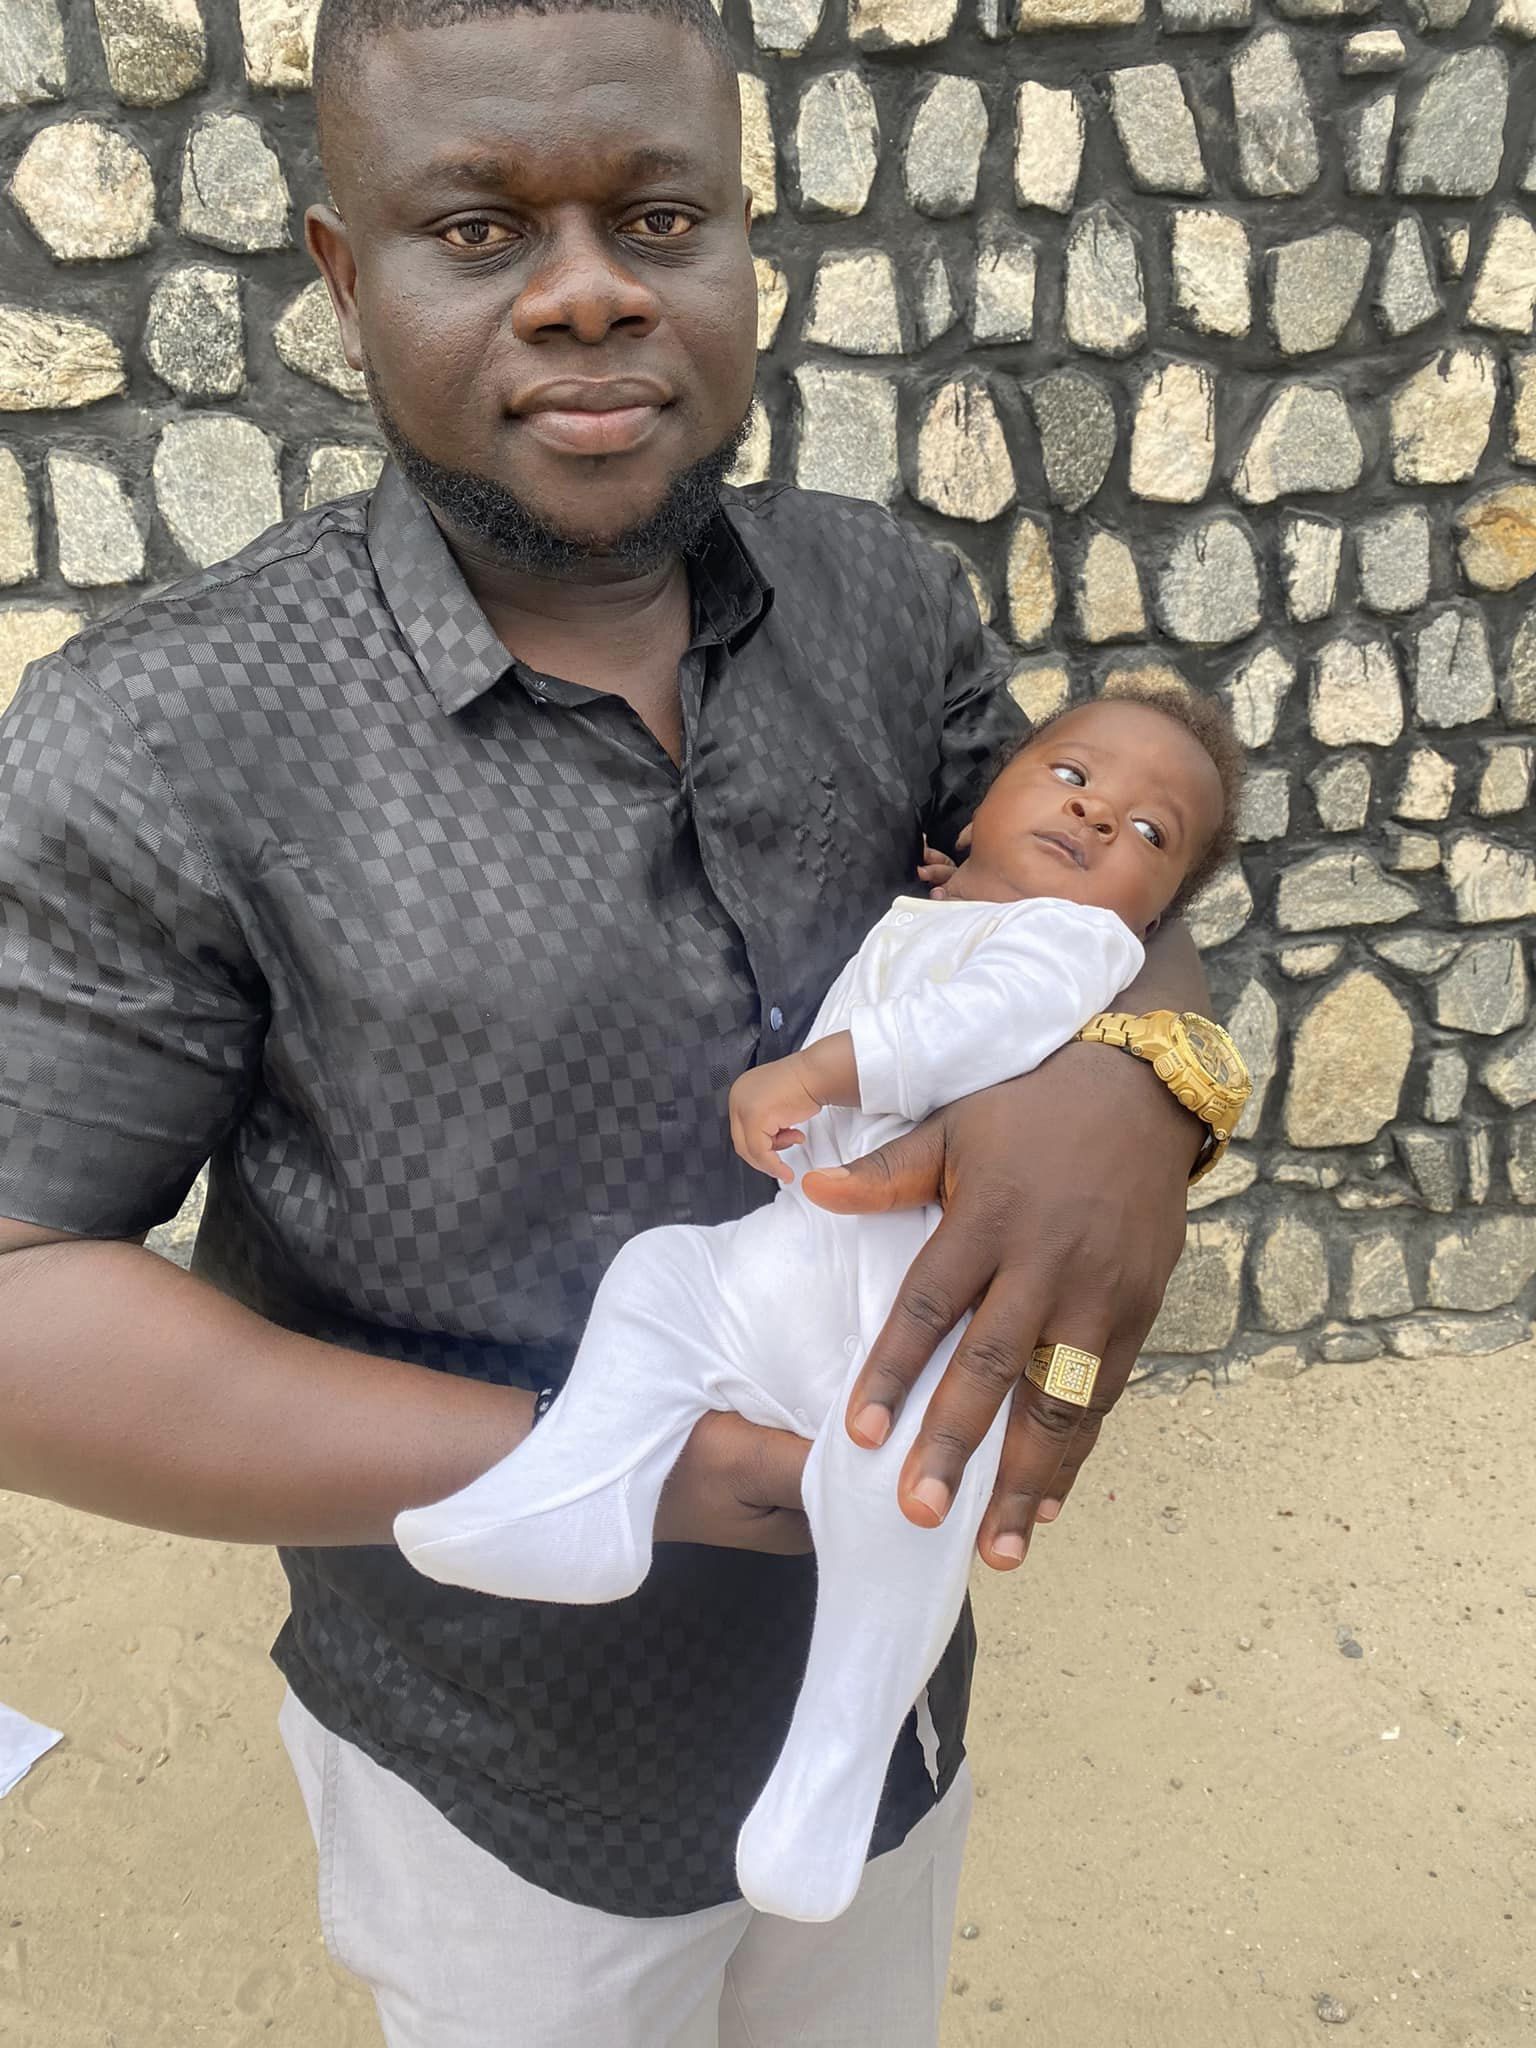 Abandoned one-month-old baby rescued in Delta community